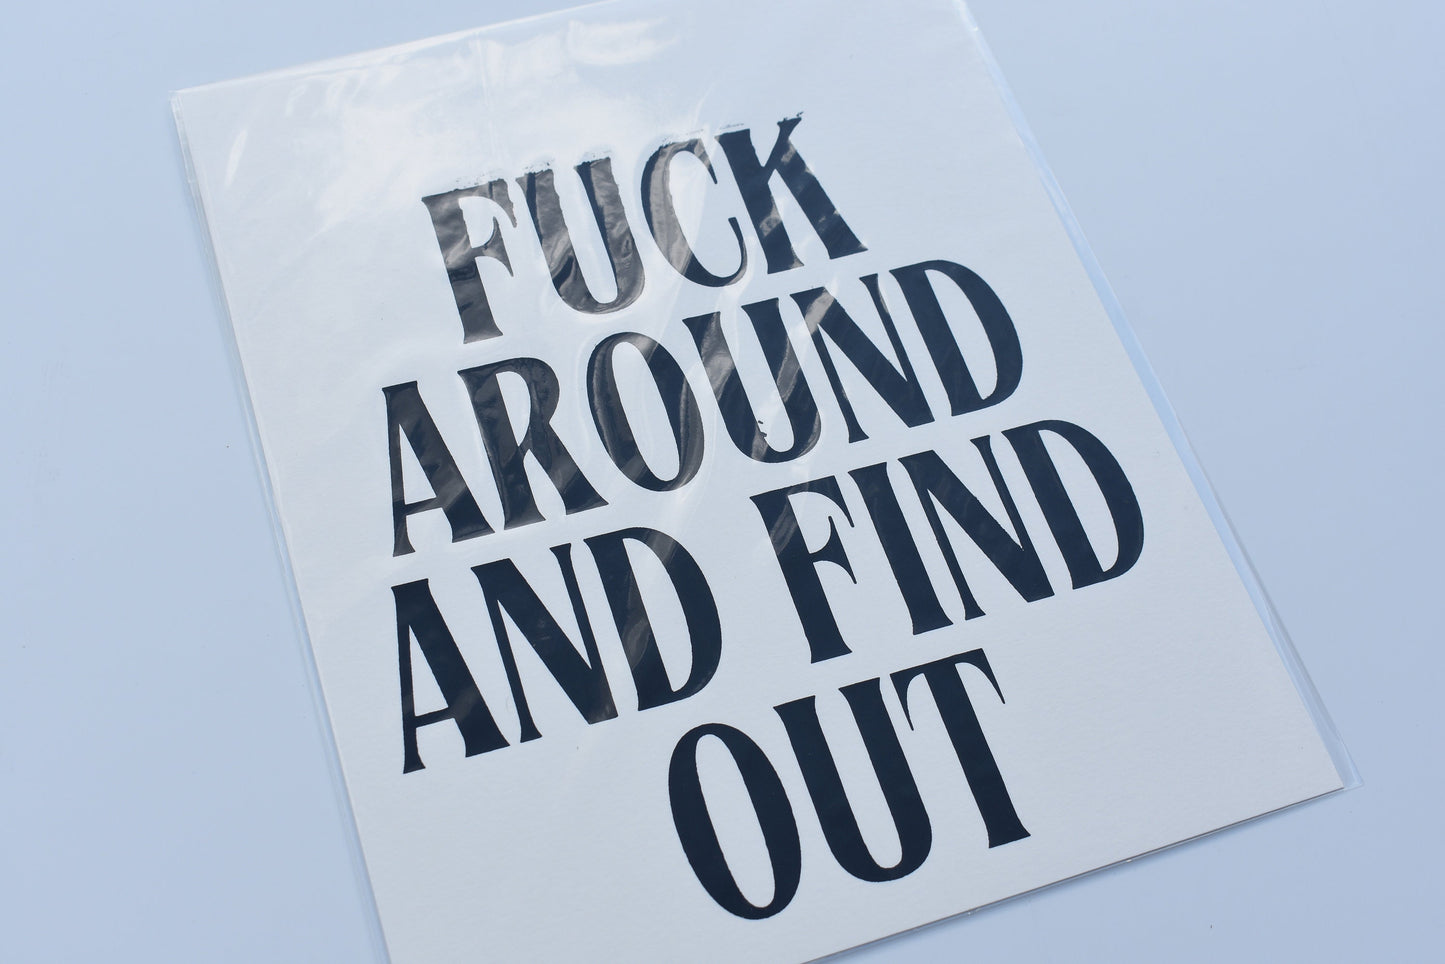 F*CK around and find out Screenprint, Grunge Art Print, Explicit Art, Fuck Art, Fuck Around and find out art